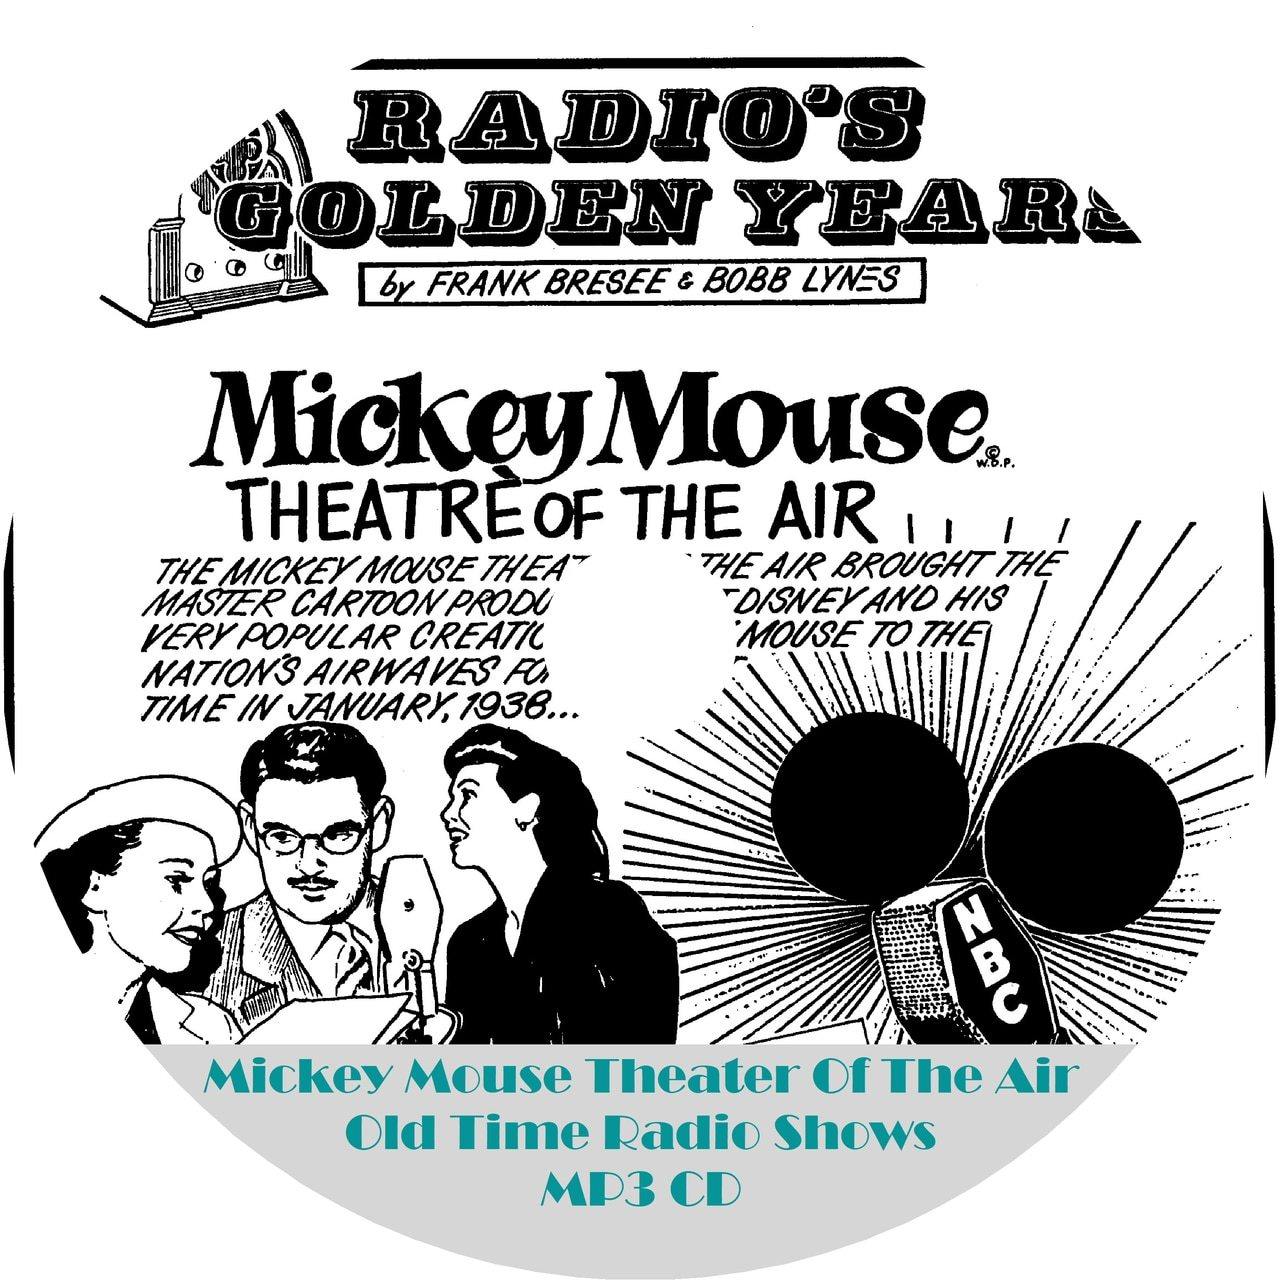 Mickey Mouse Theater Of The Air Old Time Radio Shows 7 Episodes On MP3 CD - OTR World